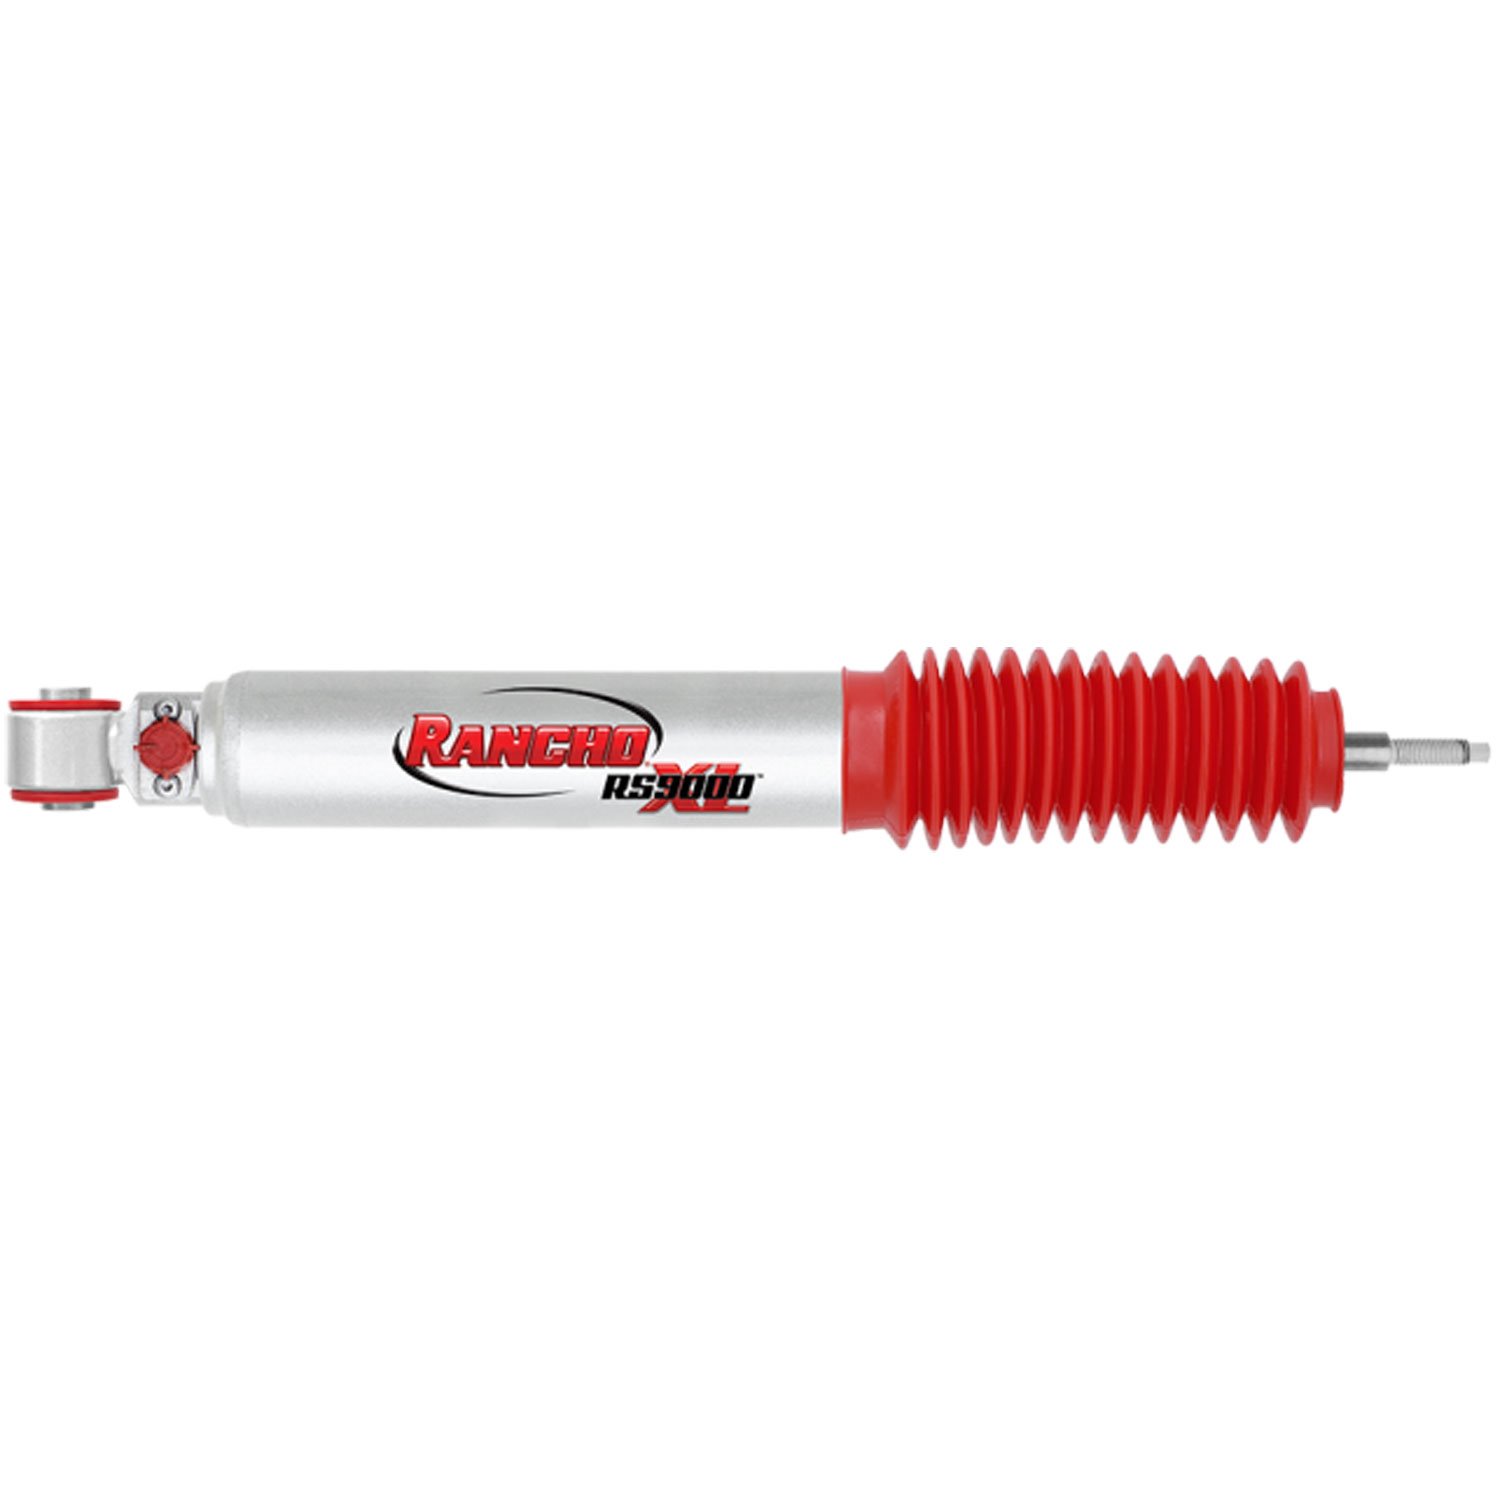 RS9000XL Rear Shock Absorber Fits Toyota 4Runner and